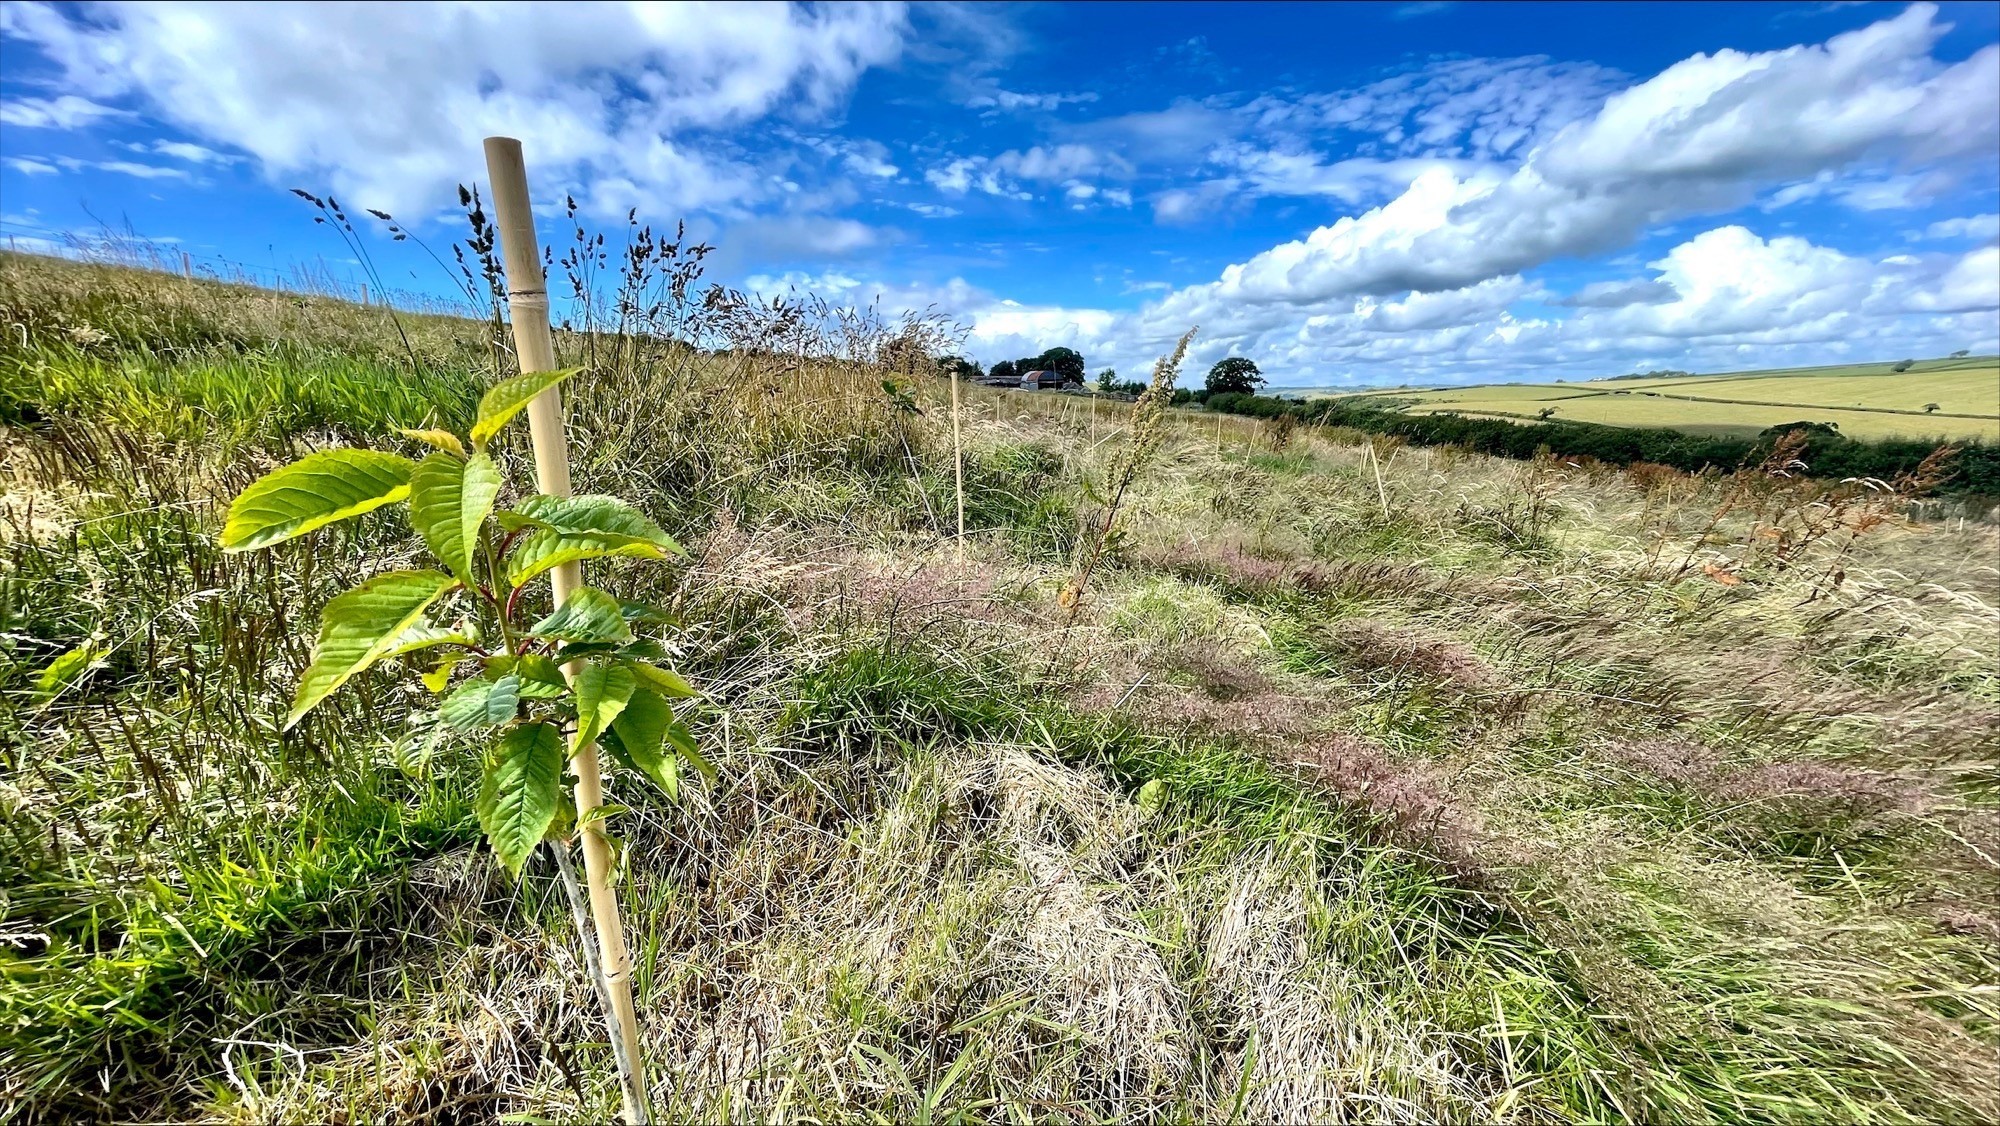 Newly planted trees in Wales survive the drought conditions and summer heatwaves (Mike Howe/National Trust/PA)